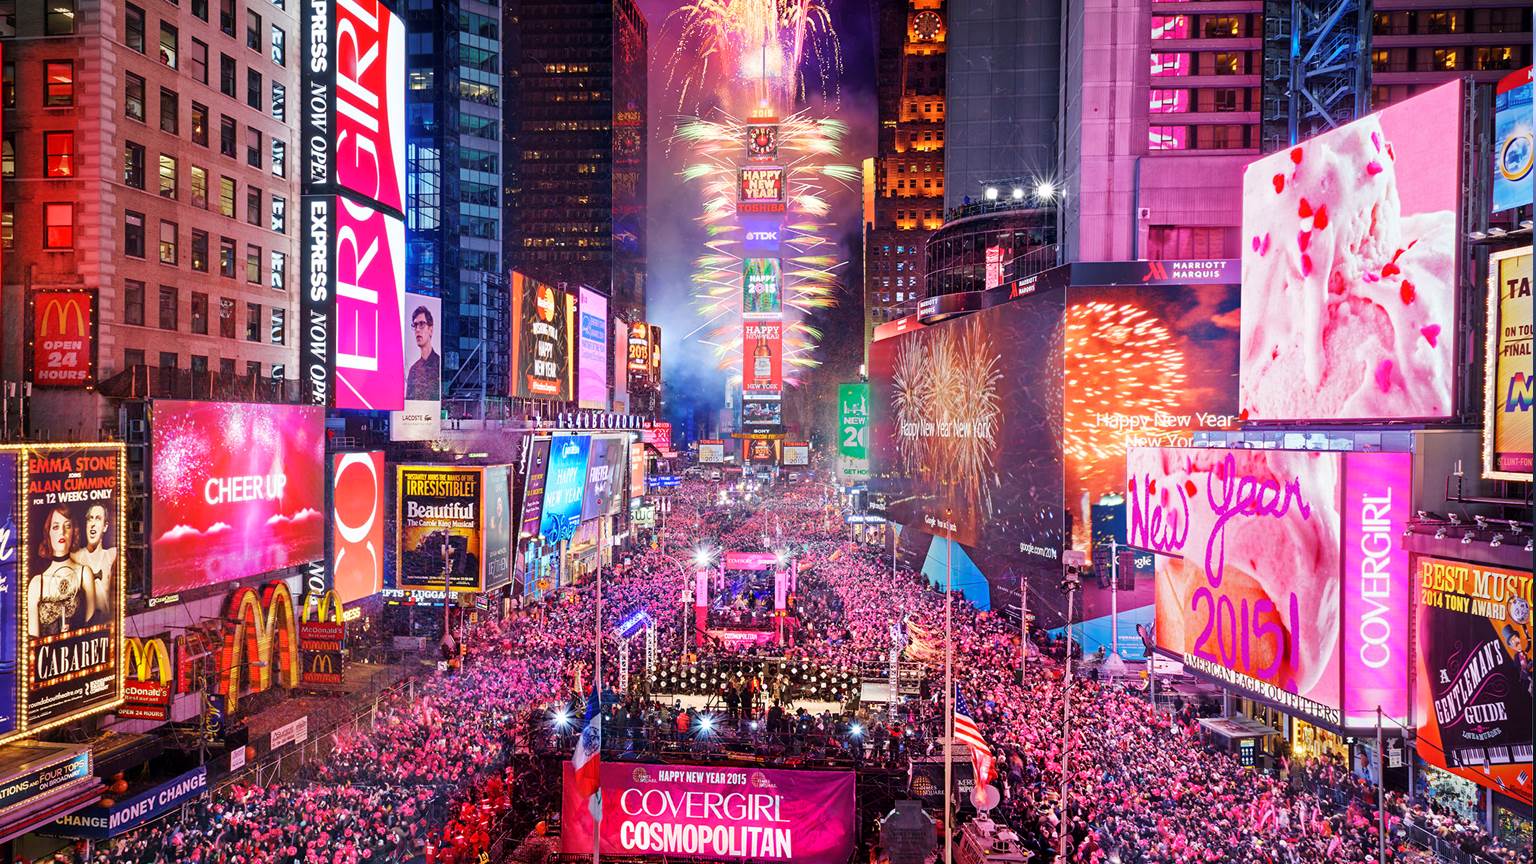 New Year’s Eve Celebration in Times Square